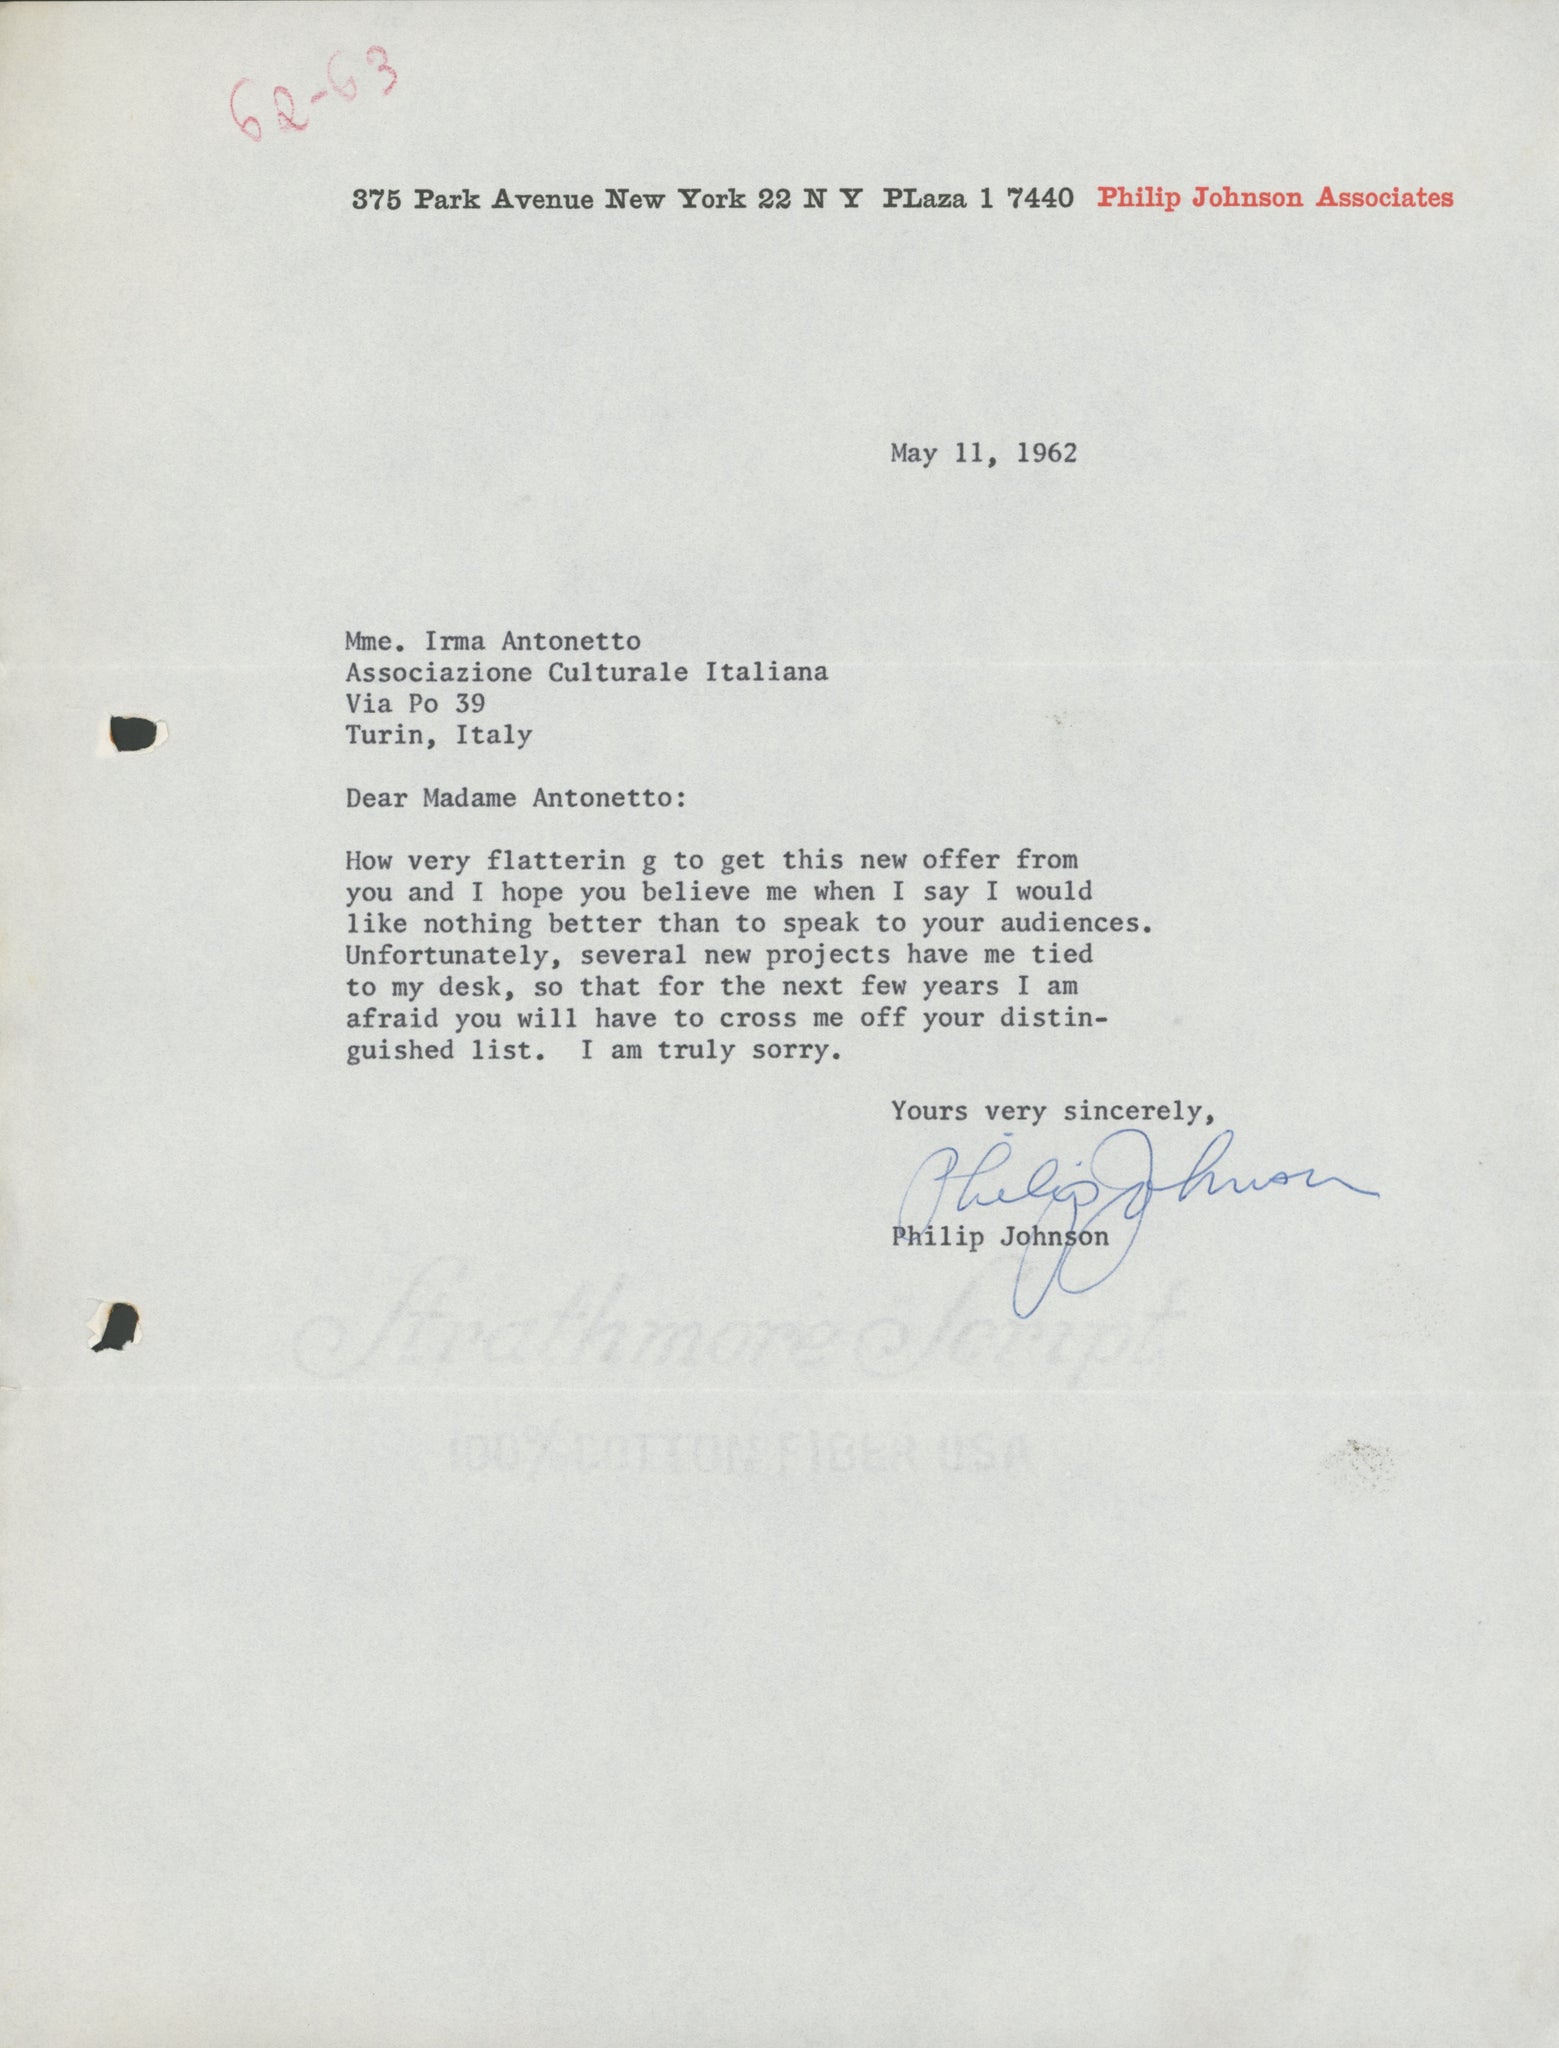 Philip Johnson “Several new projects have tied me to my desk”- Typed Signed Letter, 1962